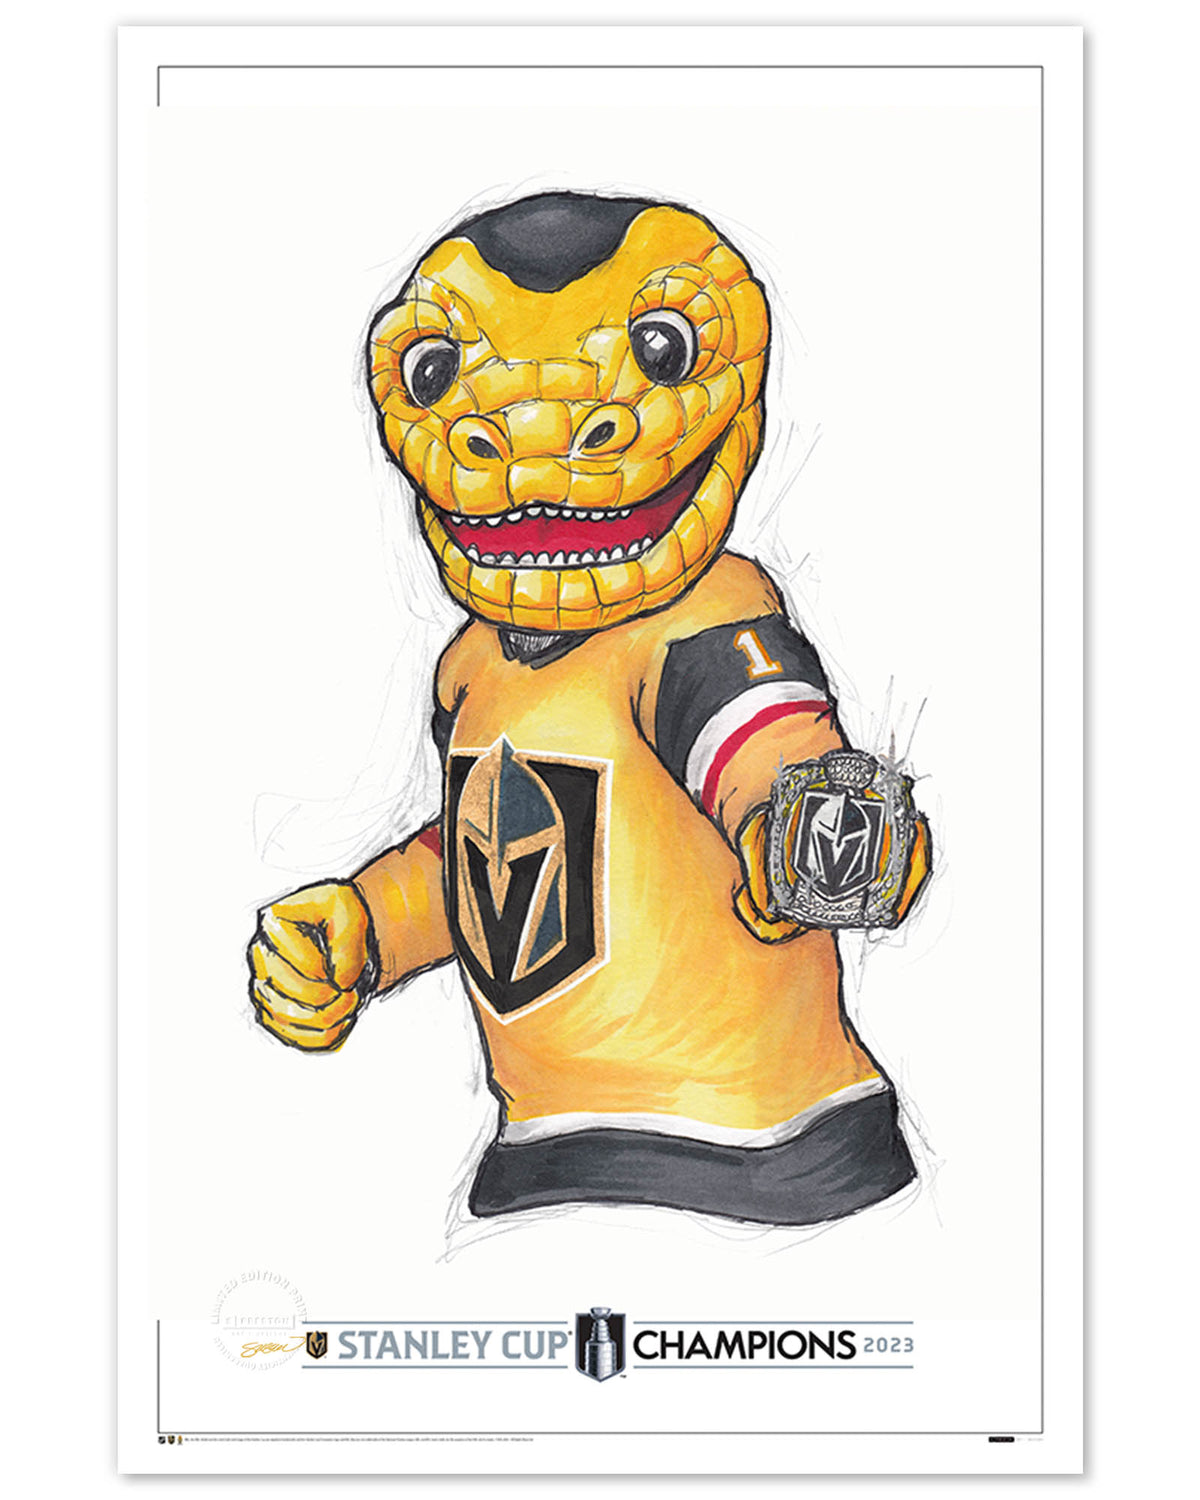 Chance 2023 Stanley Cup Champion Limited Edition Sketch